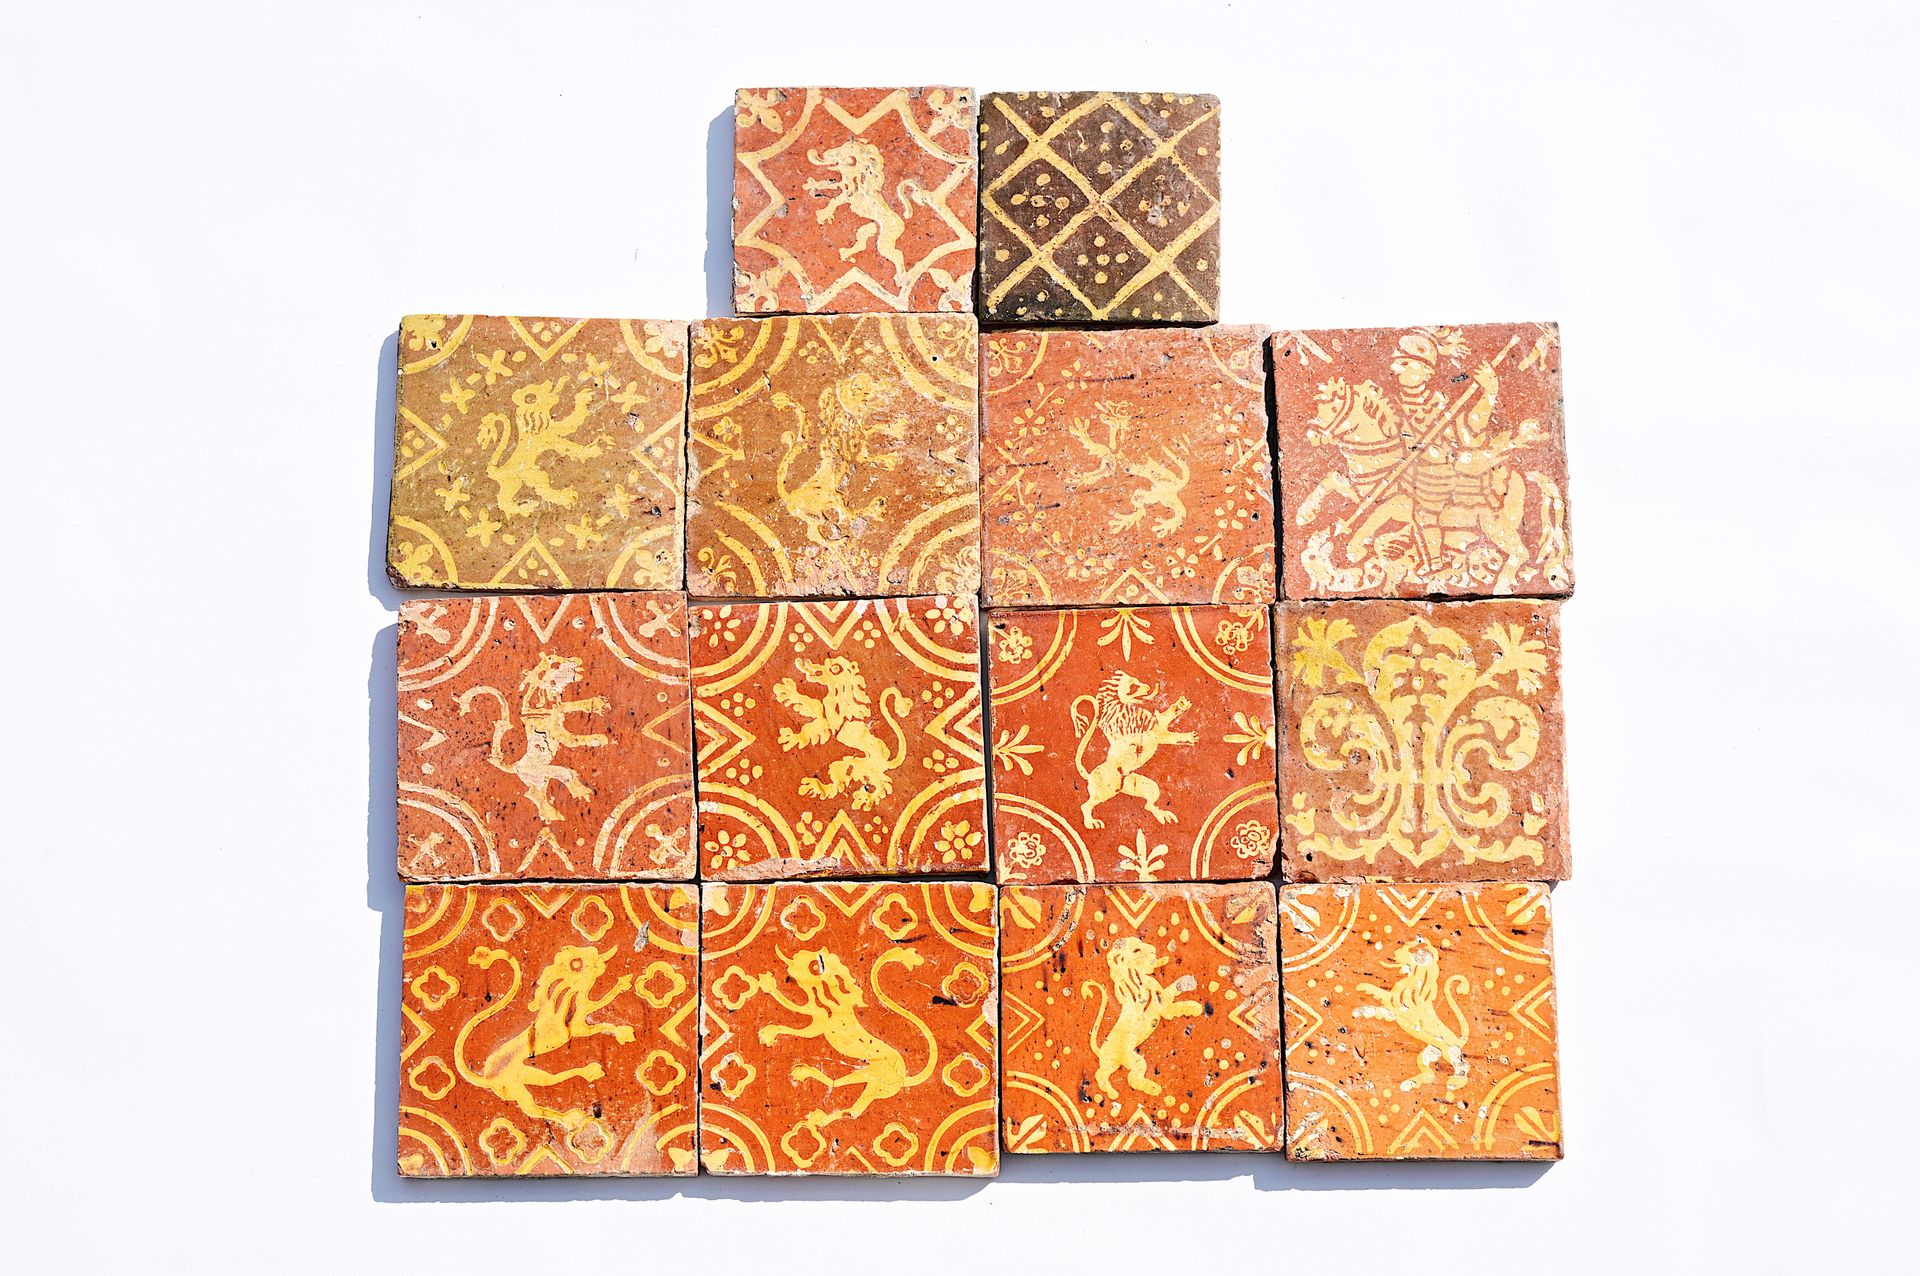 Fourteen Flemish decorated redware tiles in medieval style, 18th/19th C. Quatorz&hellip;